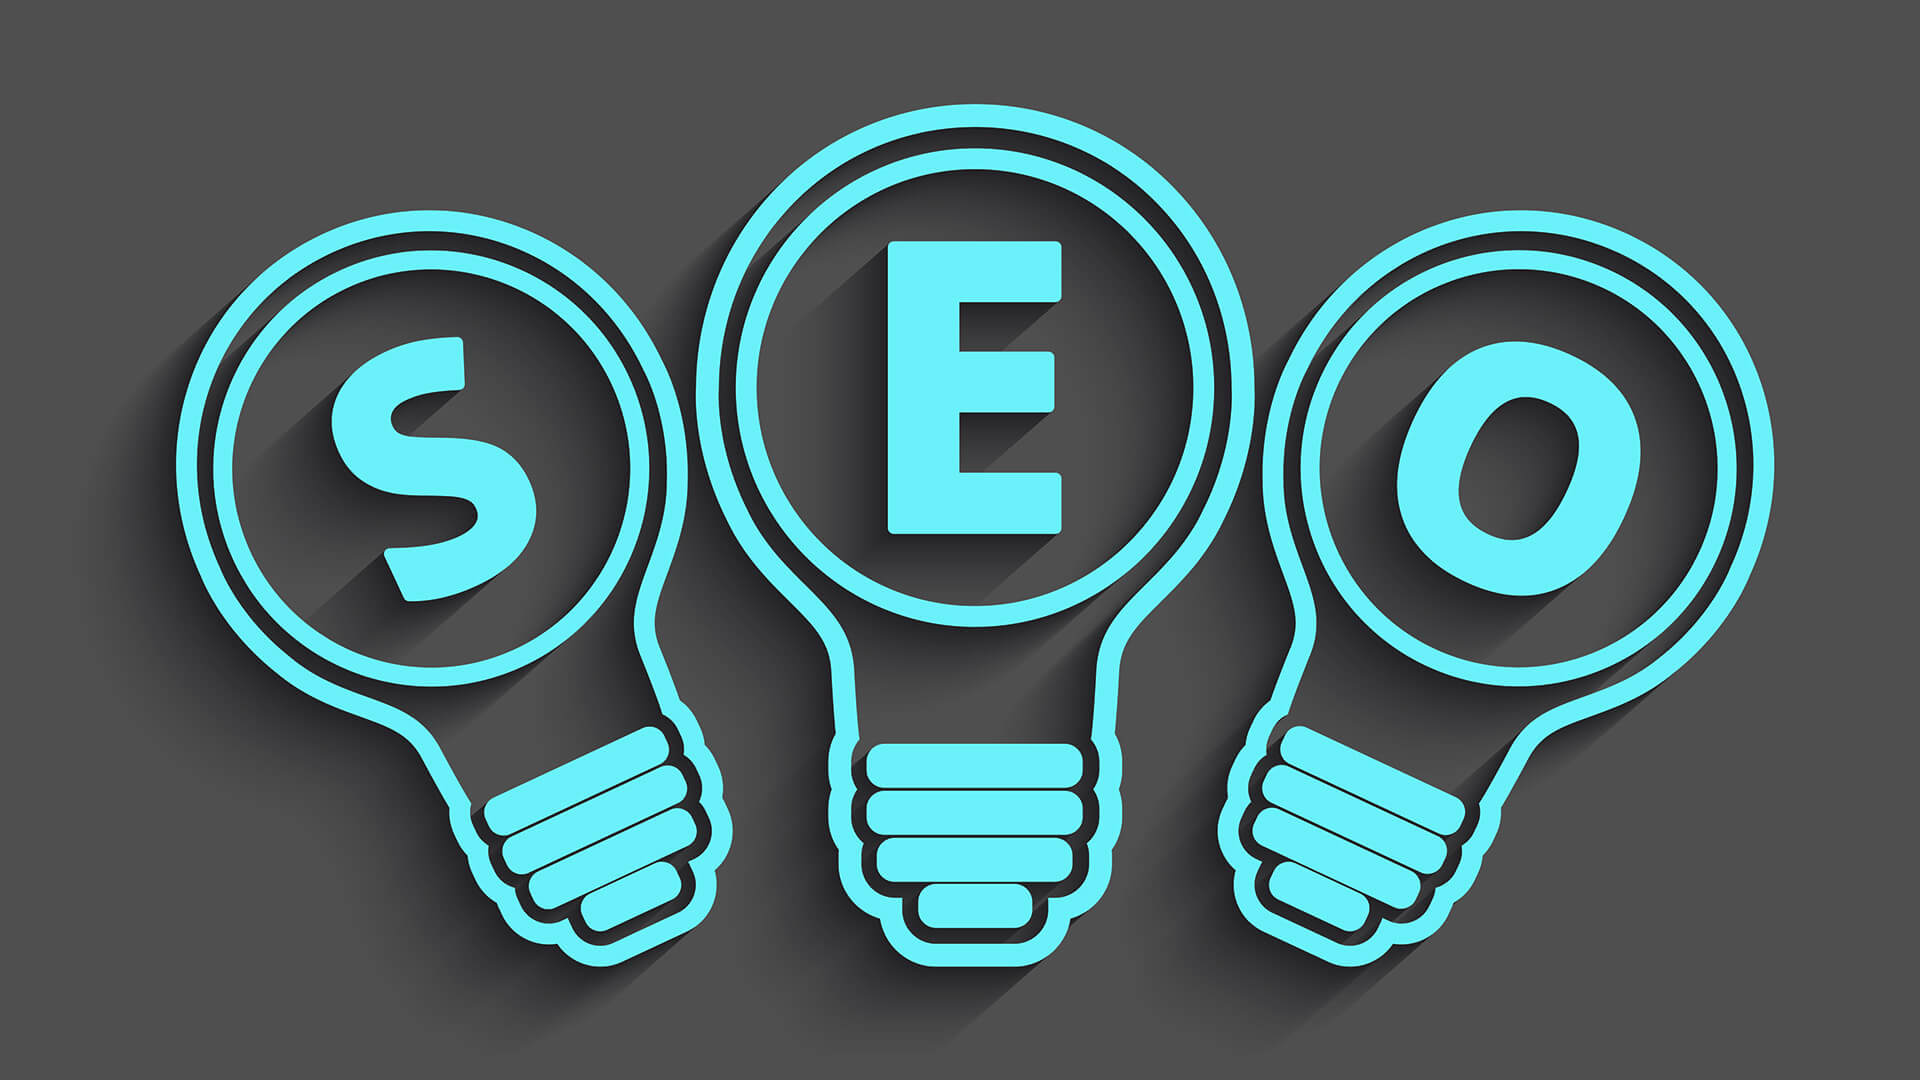 What services include in SEO?